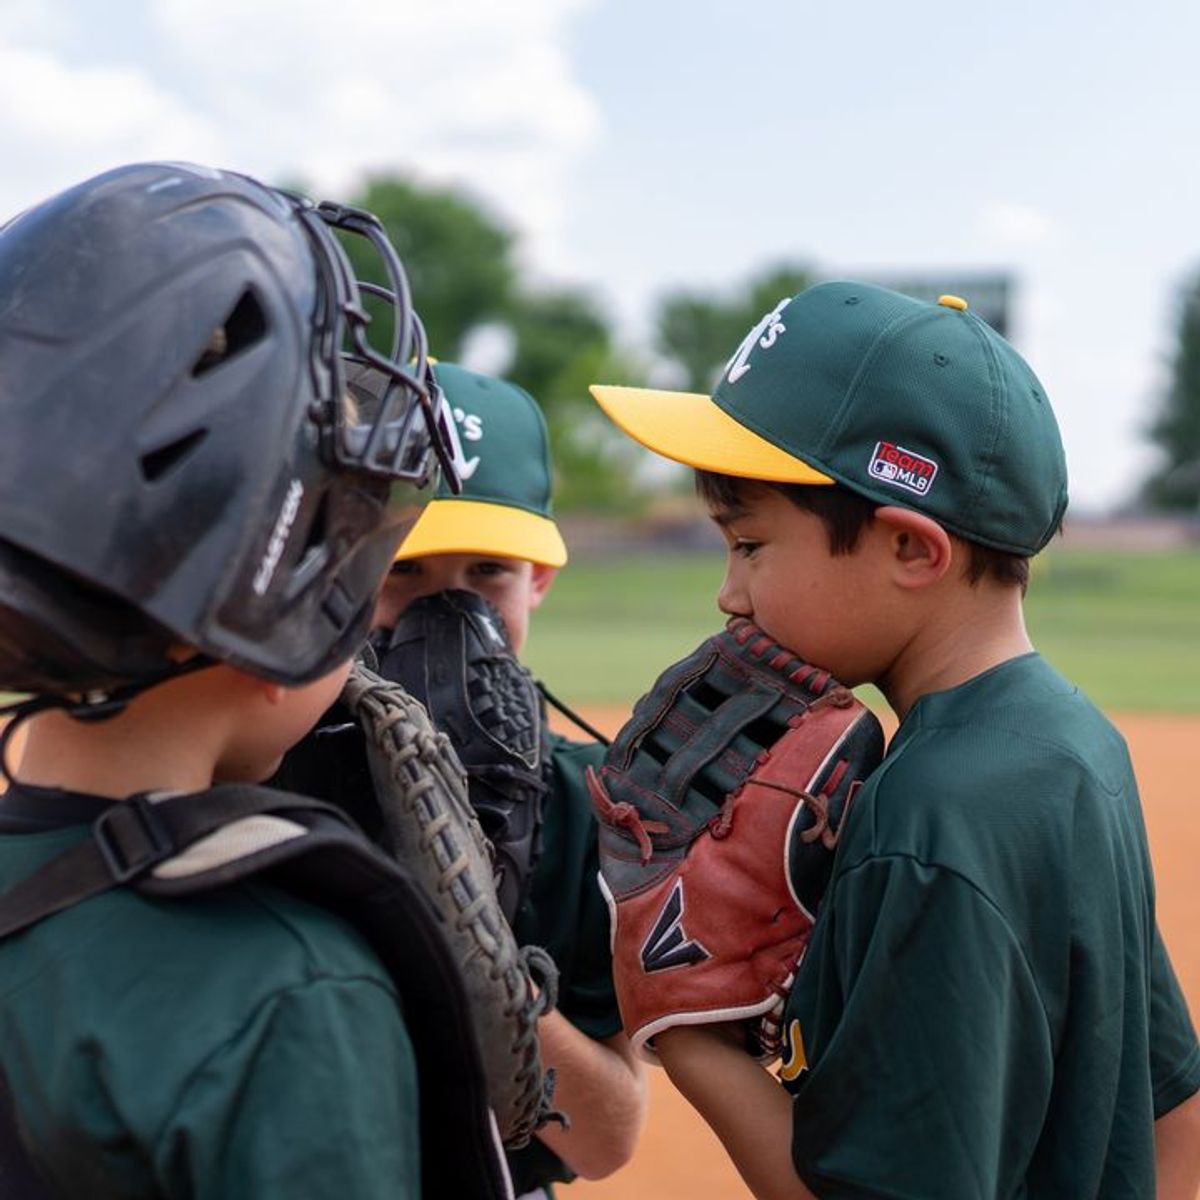 It's National Little League week! We are... Outdoor Cap Co Inc